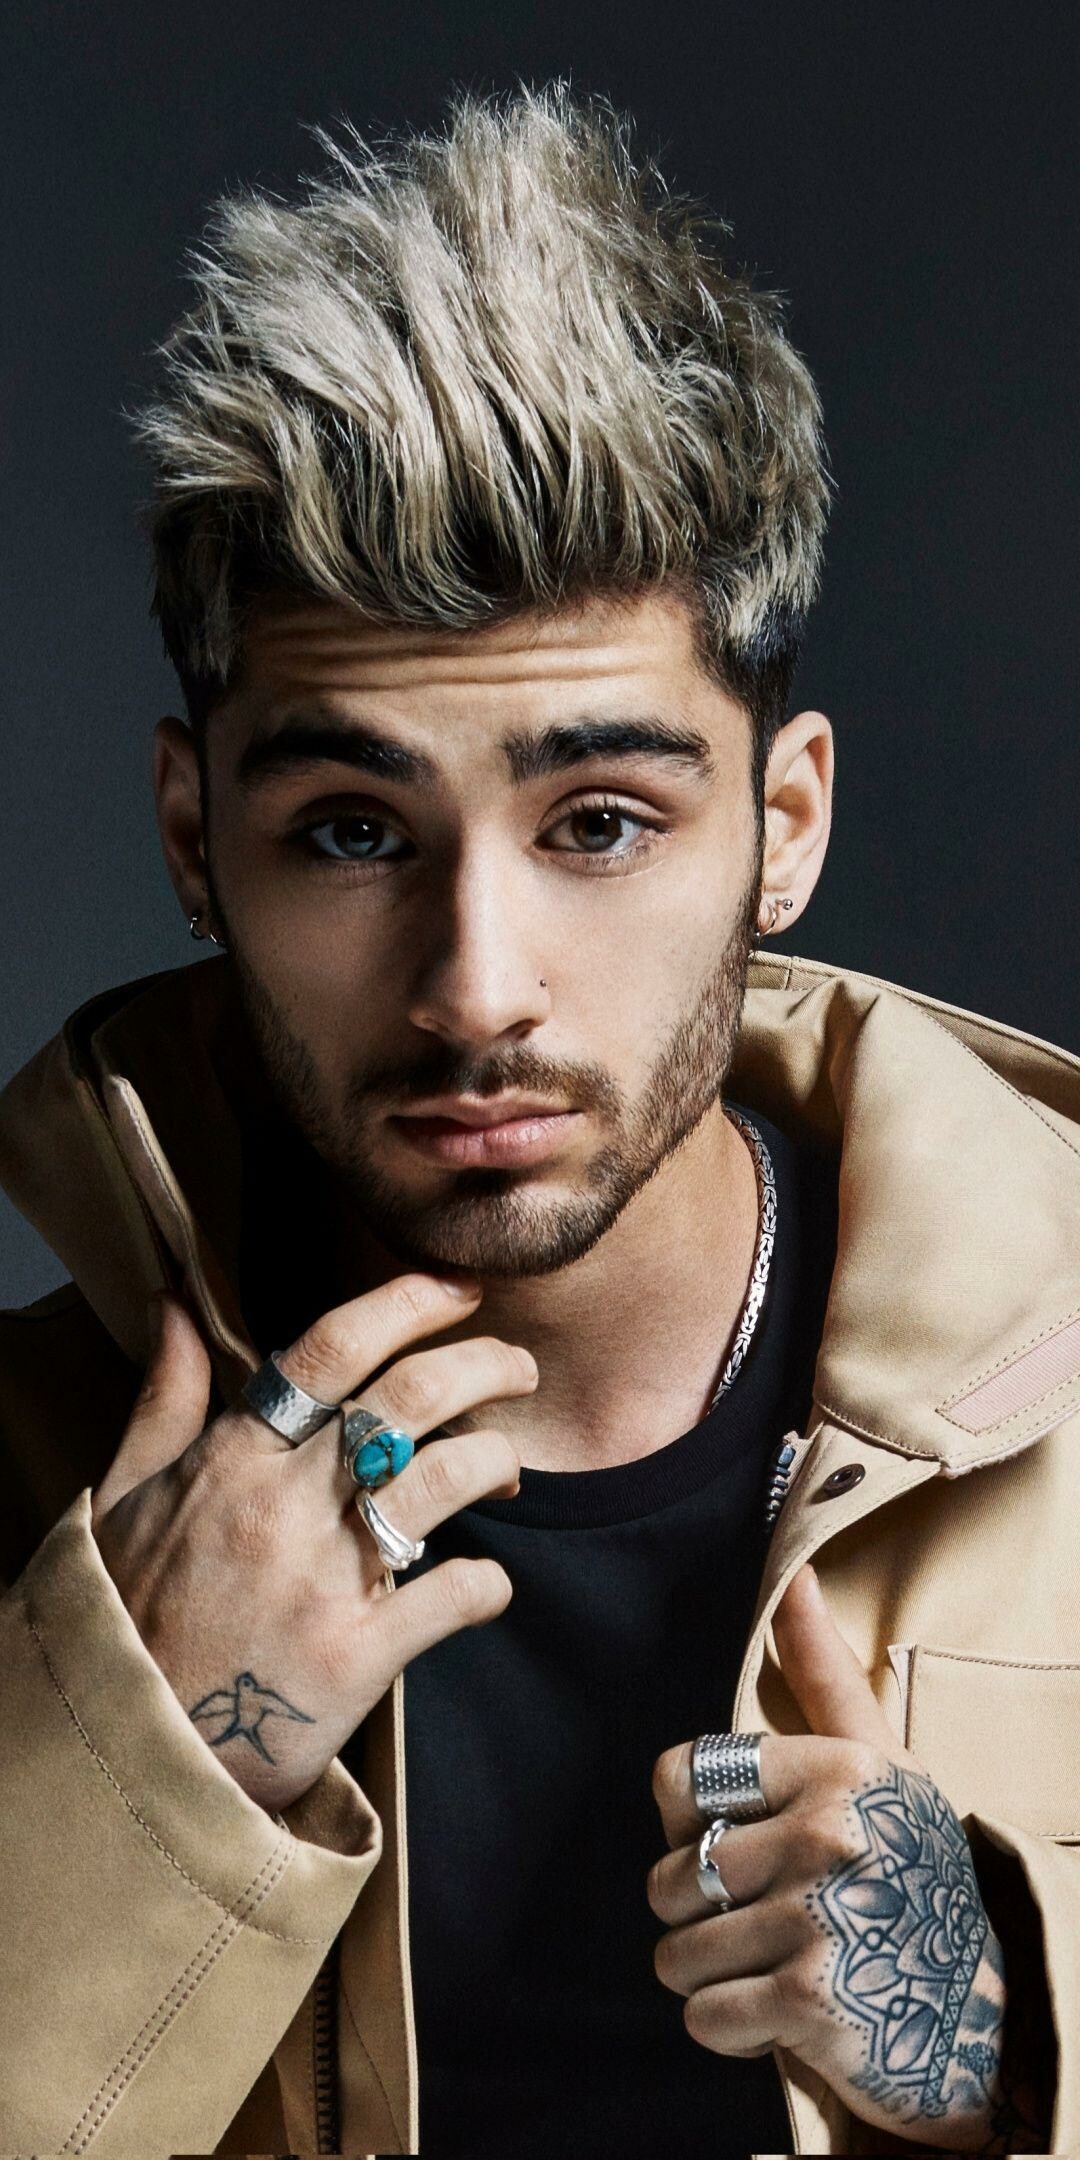 Zayn Malik: The first UK artist to debut at number one on the Hot 100 with a first charted single. 1080x2160 HD Background.